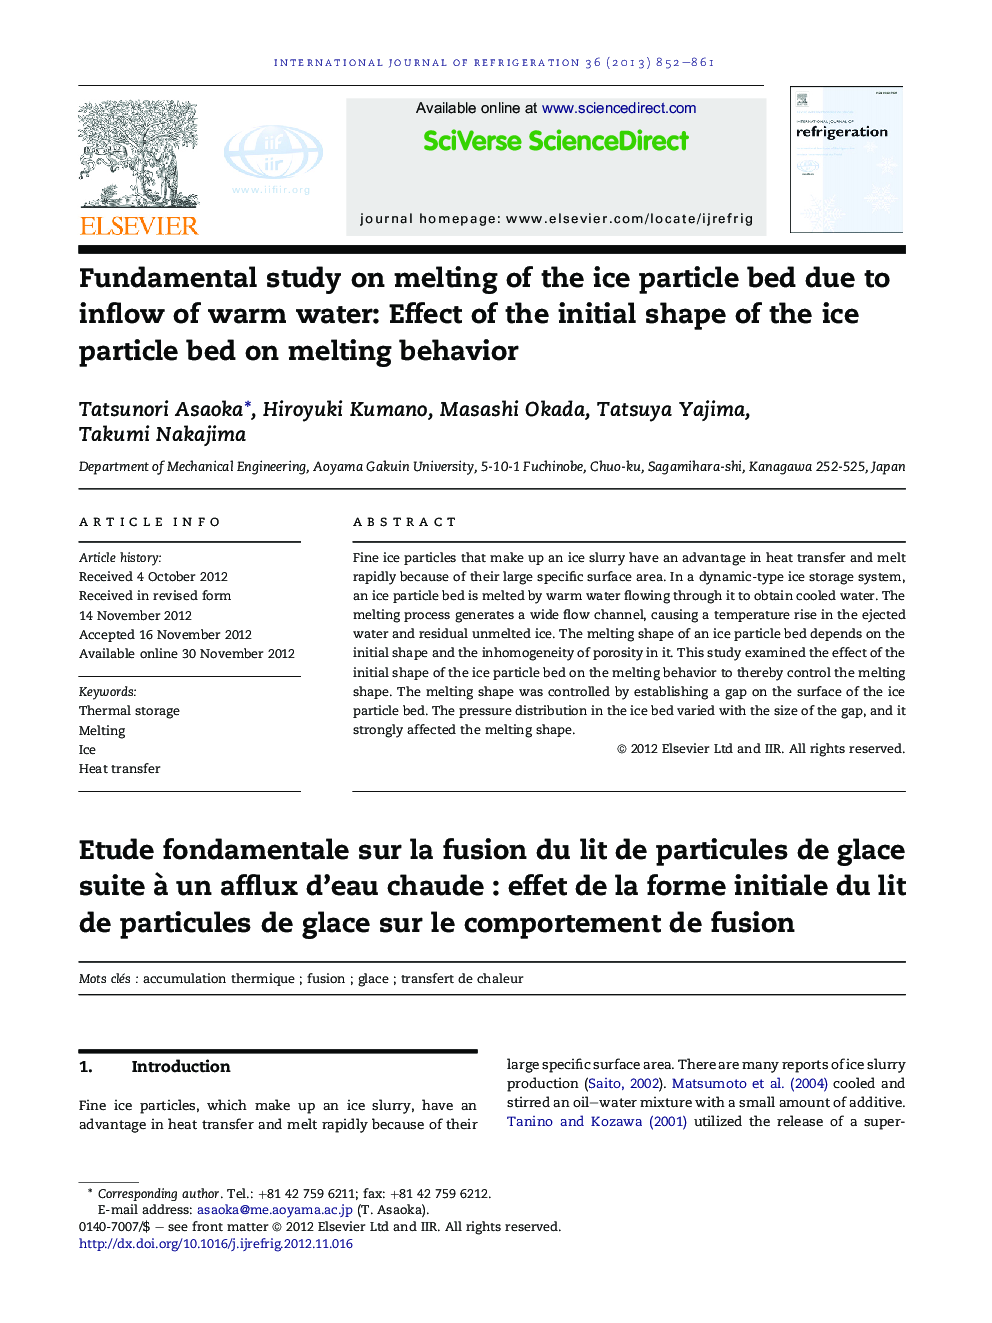 Fundamental study on melting of the ice particle bed due to inflow of warm water: Effect of the initial shape of the ice particle bed on melting behavior